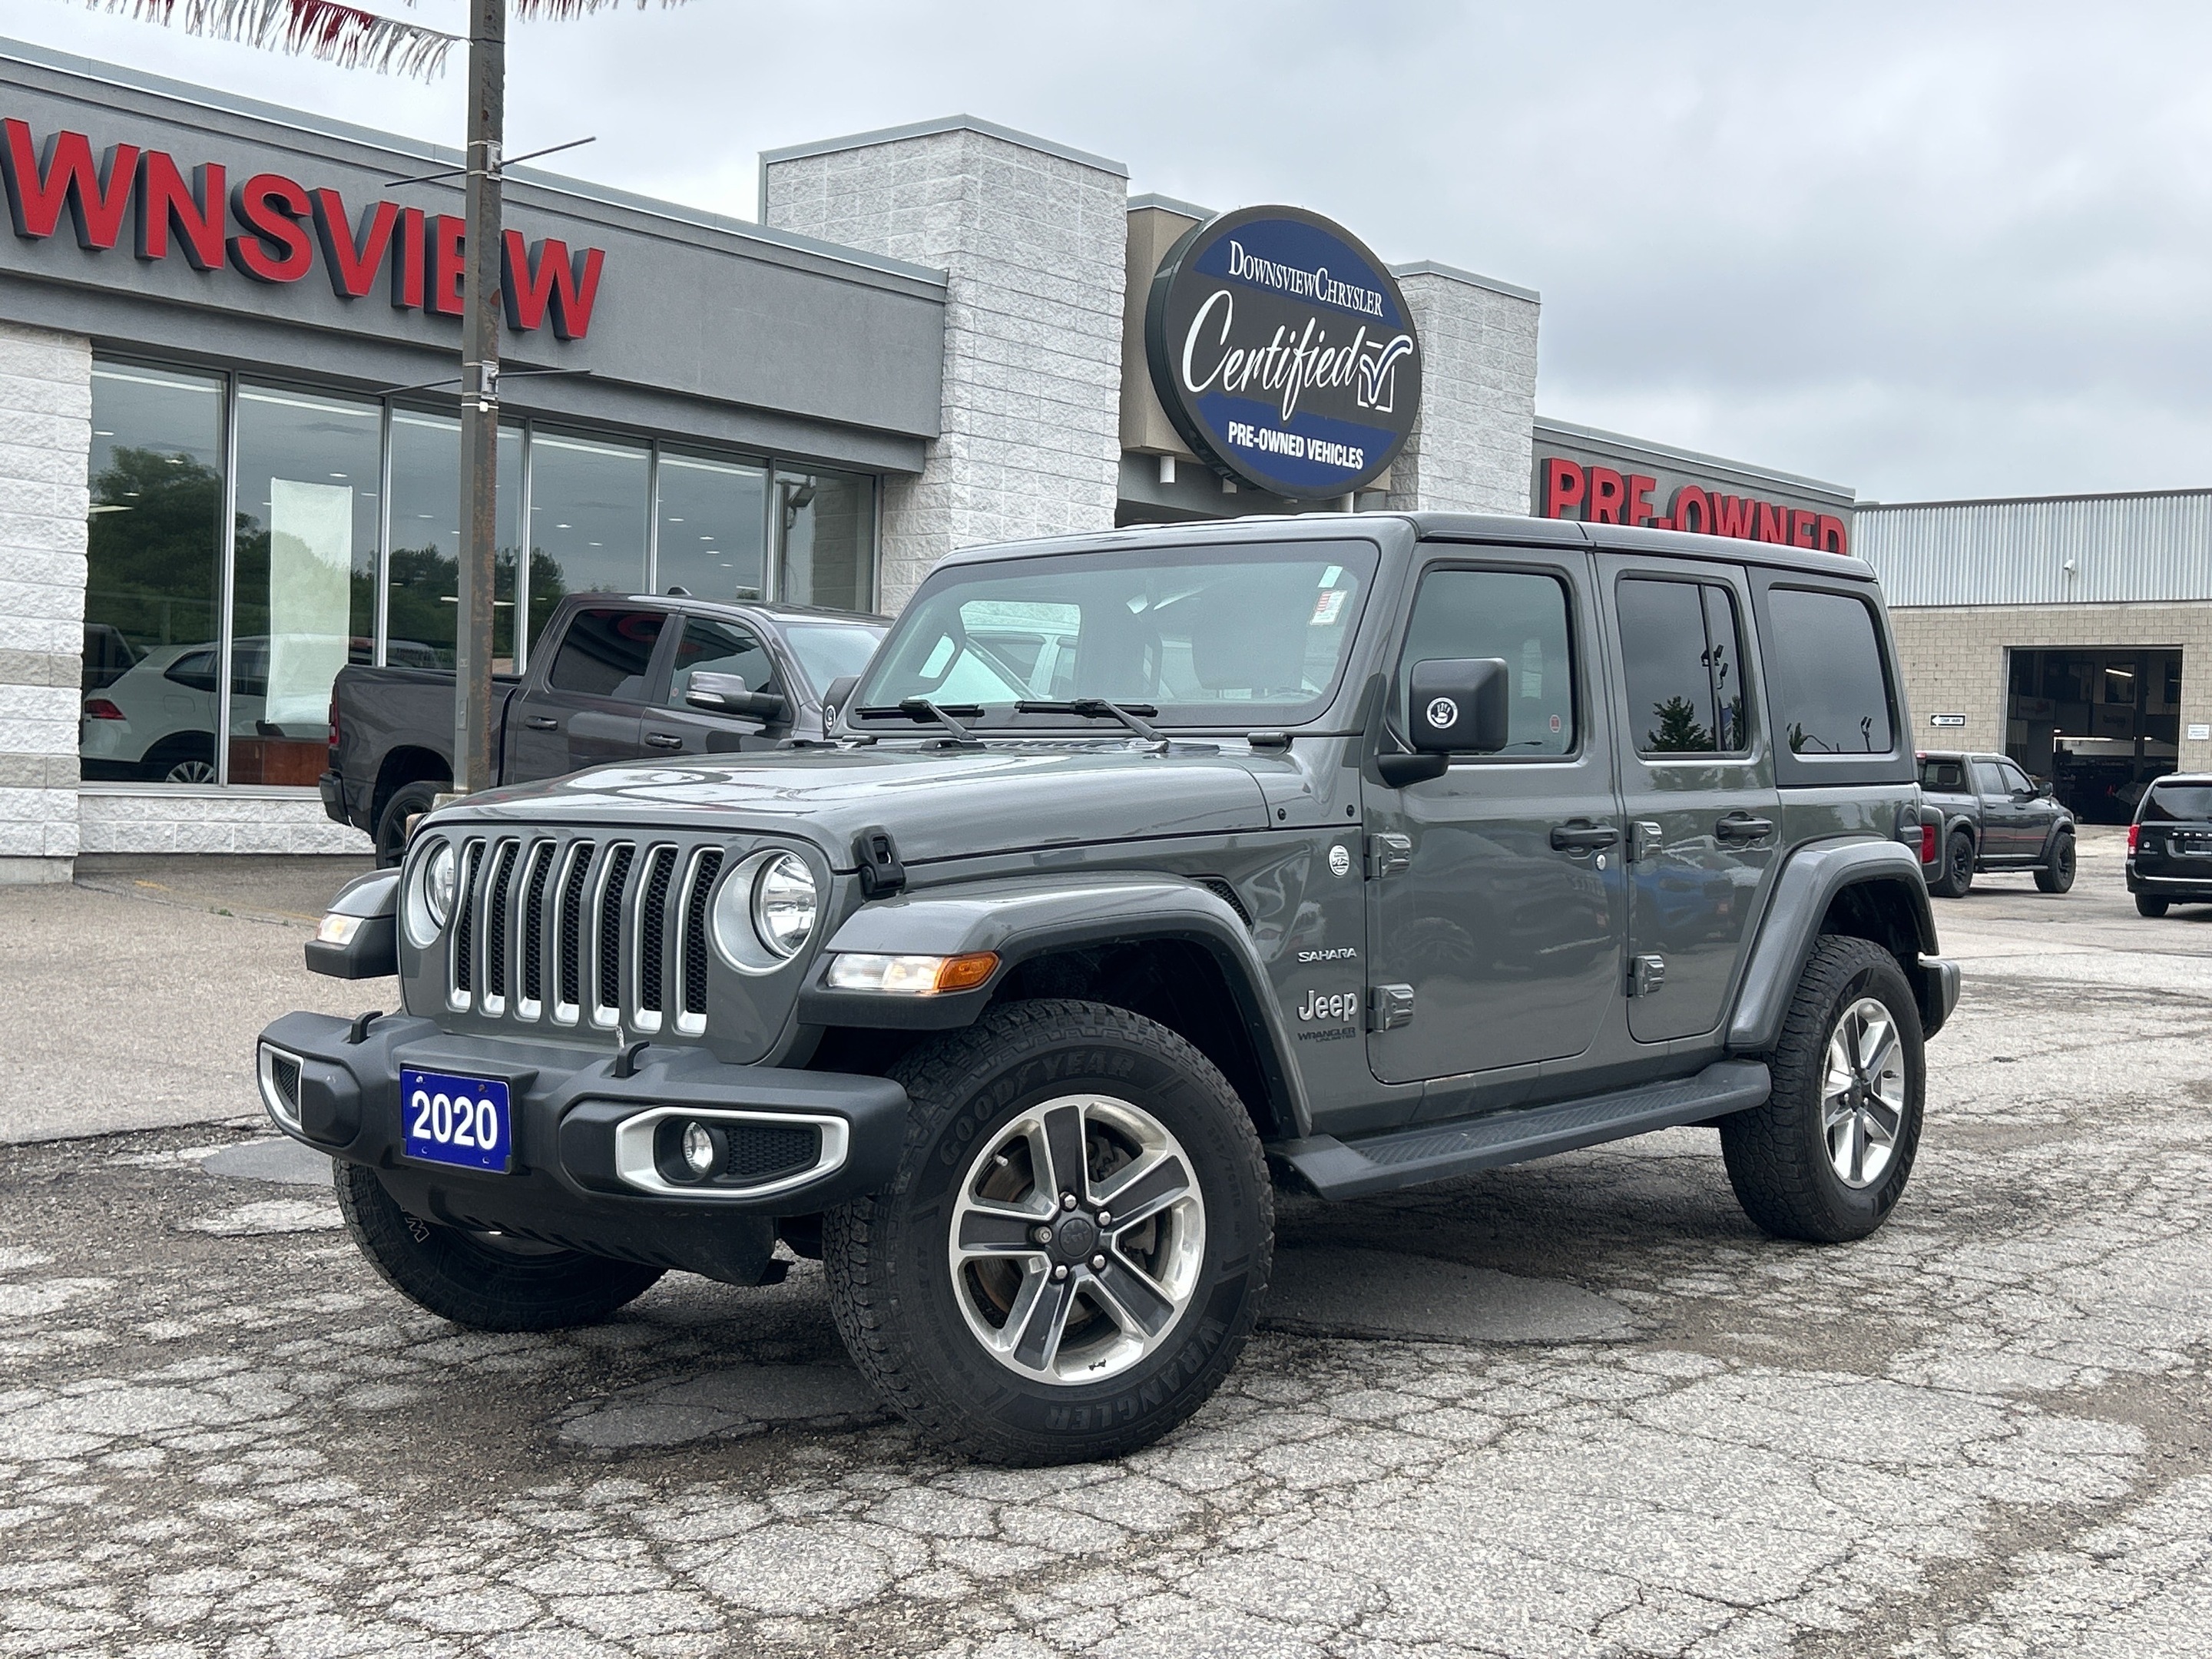 2020 Jeep WRANGLER UNLIMITED Unlimited Sahara w/Cold Weather, Navigation